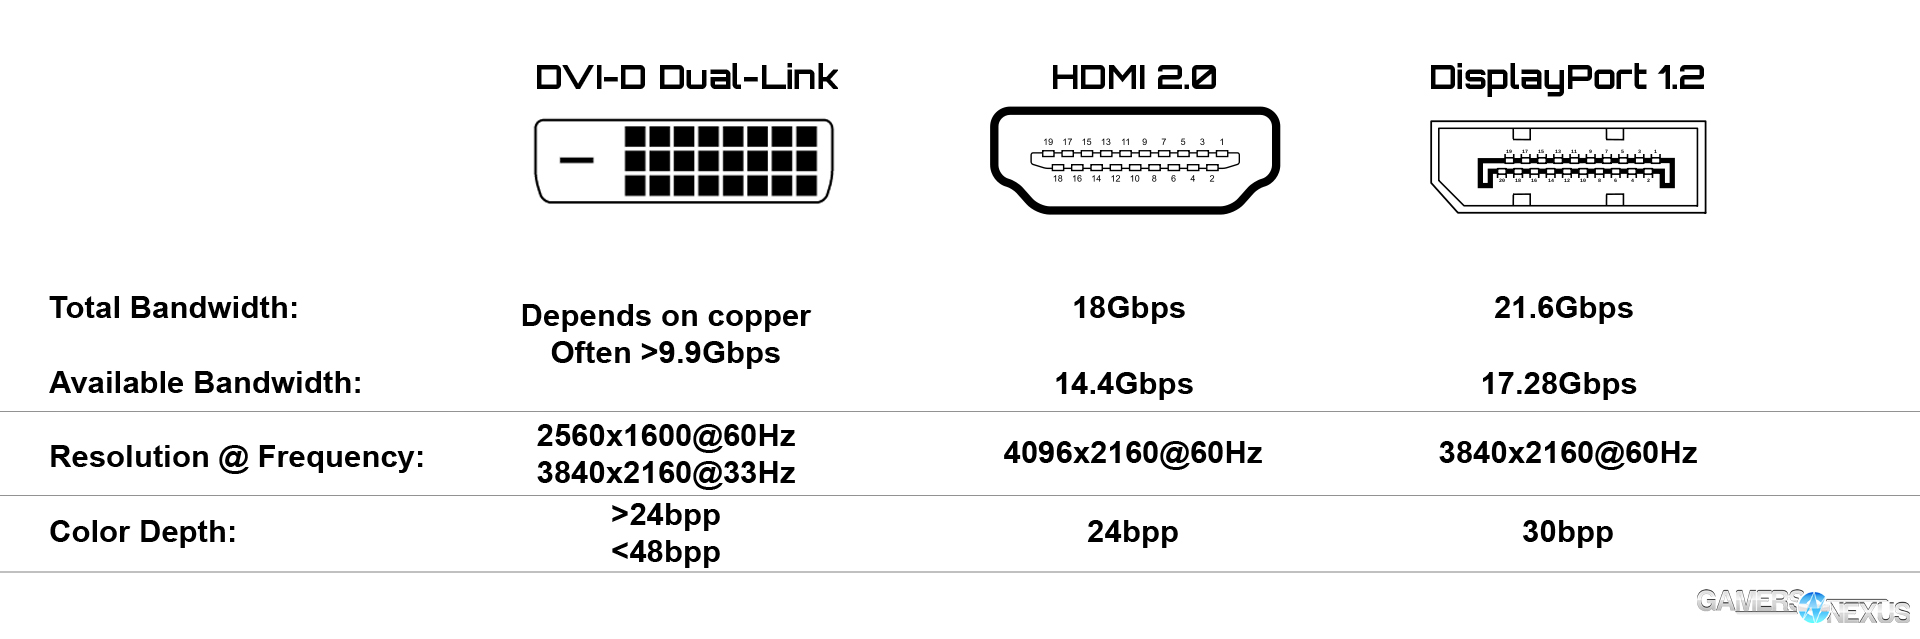 https://gamersnexus.net/guides/images/media/2014/guides/cables-bandwidth.jpg